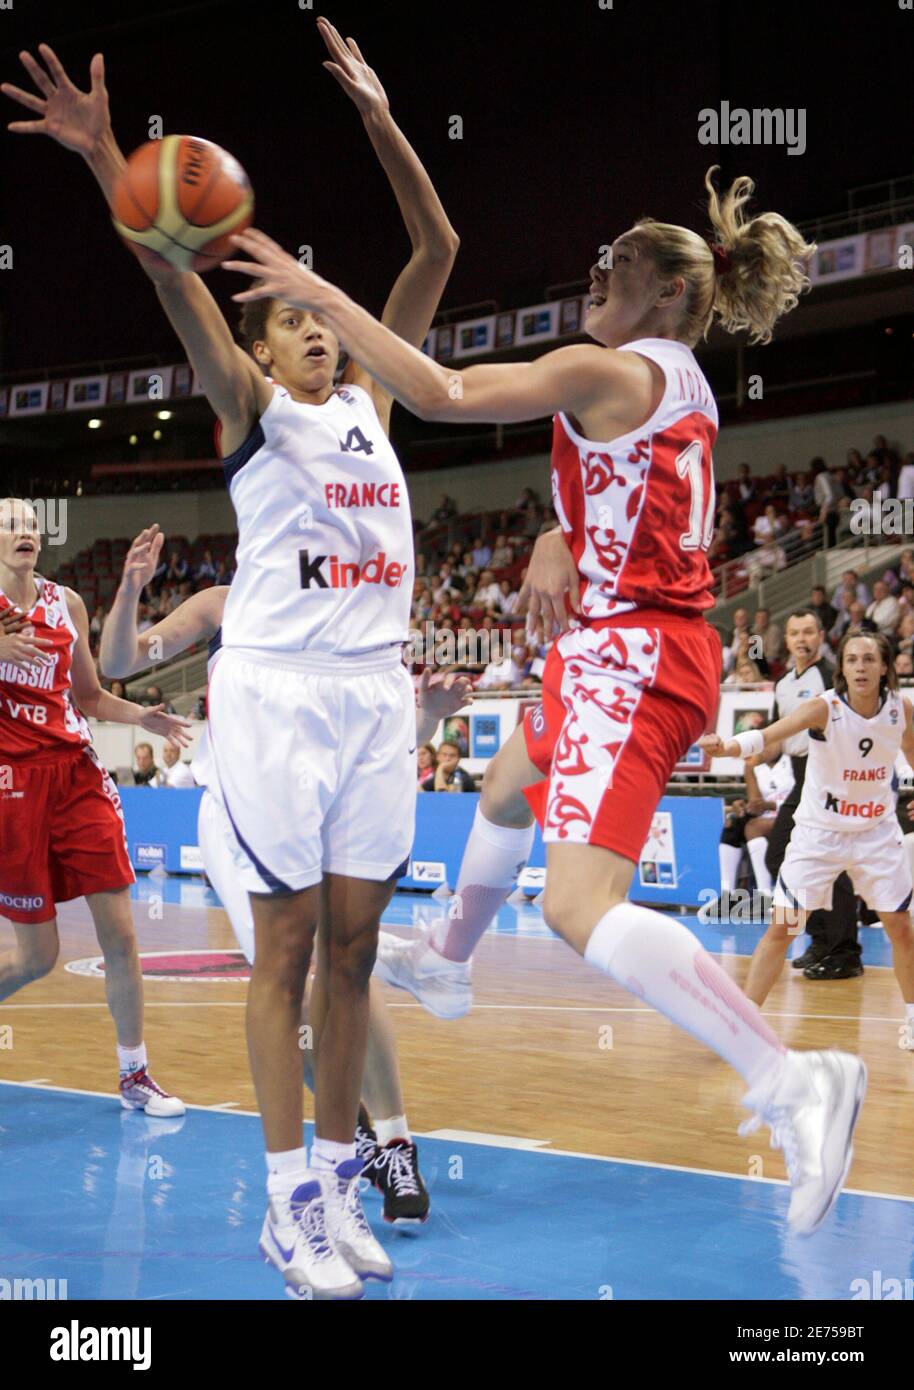 Russia's Ilona Kostin (R) fights for ball with France's Emmeline Ndongue  during their women's basketball European Championship qualifying round game  in Riga June 16, 2009. REUTERS/Ints Kalnins (LATVIA SPORT BASKETBALL Stock  Photo -